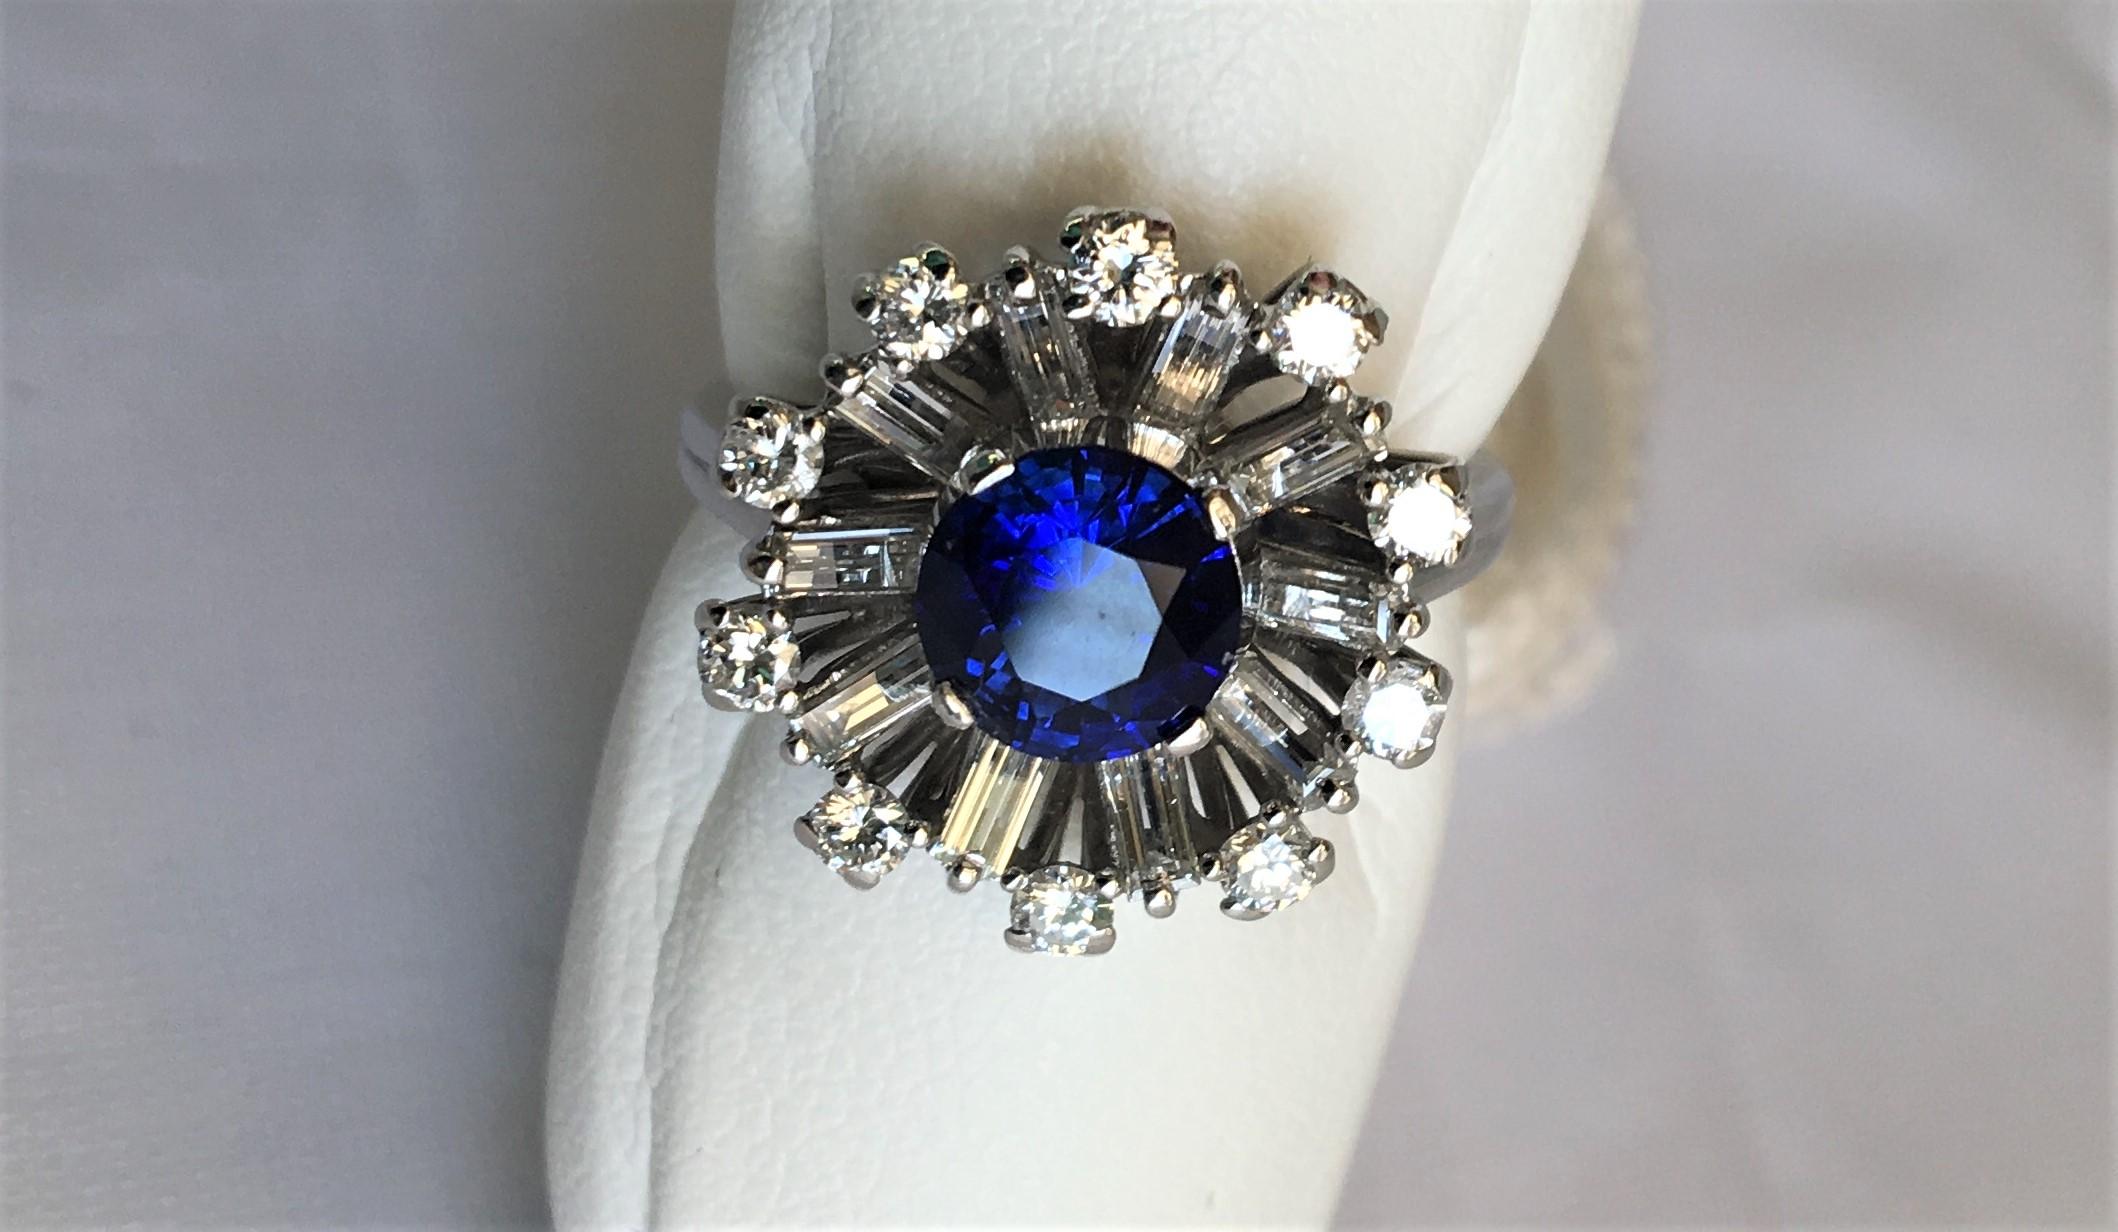 Unique vintage Cocktail Ring
Center blue sapphire with diamond halo
1.26 carat center blue sapphire, approximately 6.5mm round, outstanding color
20 diamonds (10 round and 10 baguettes), approximately 1.00 carat total diamond weight, F-G color, VS